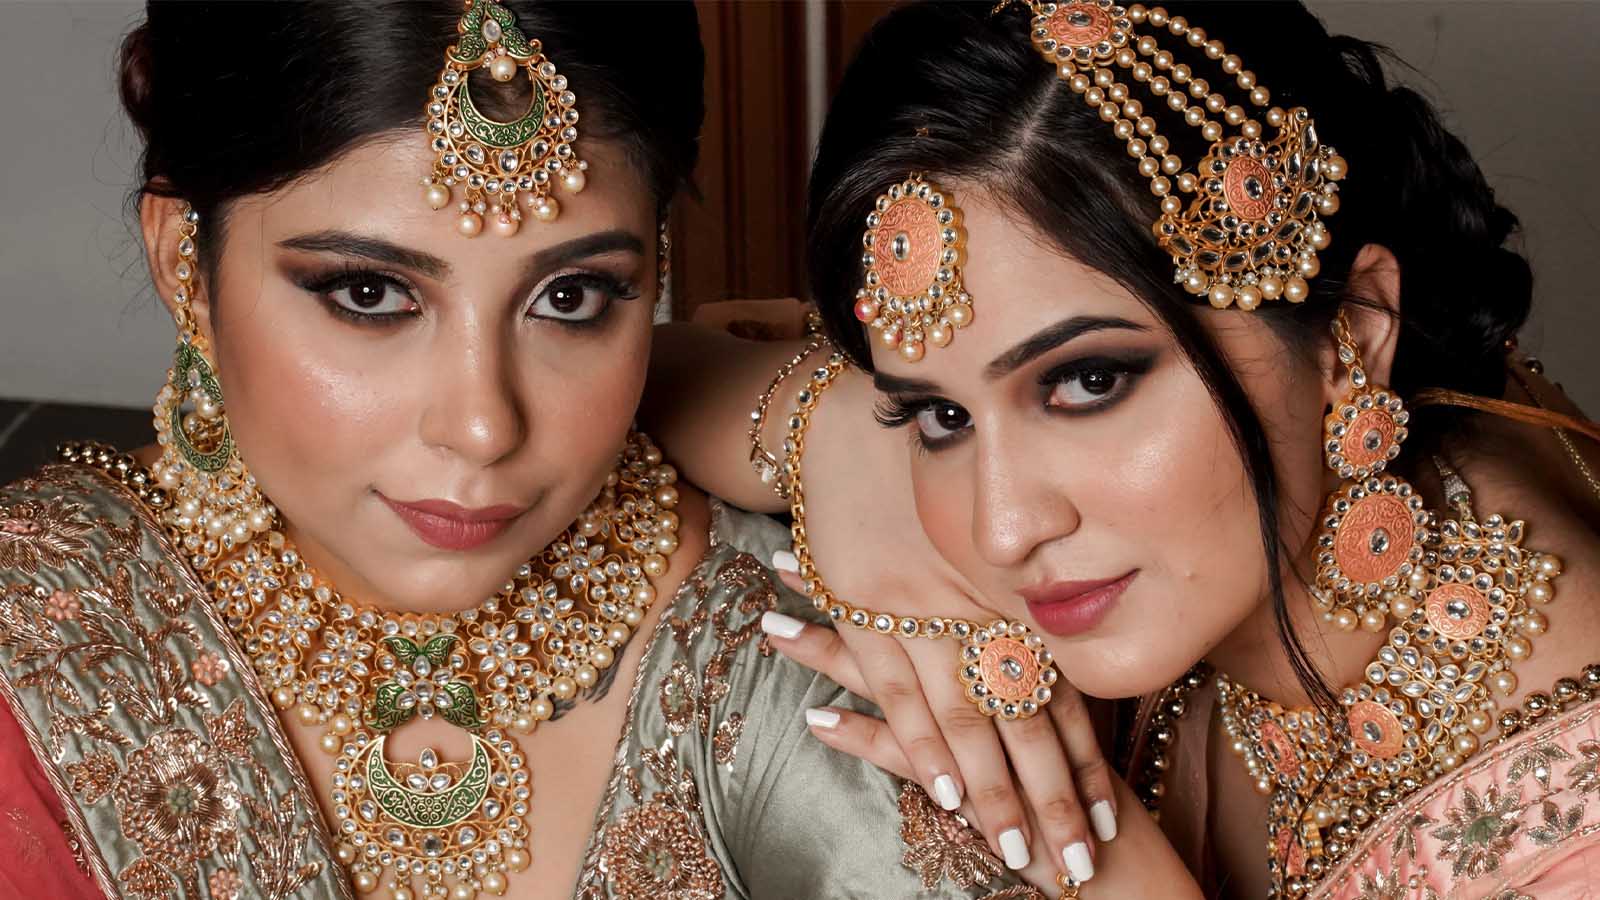 Brides-To-Be, Bookmark Your Ultimate Bridal Trousseau Checklist